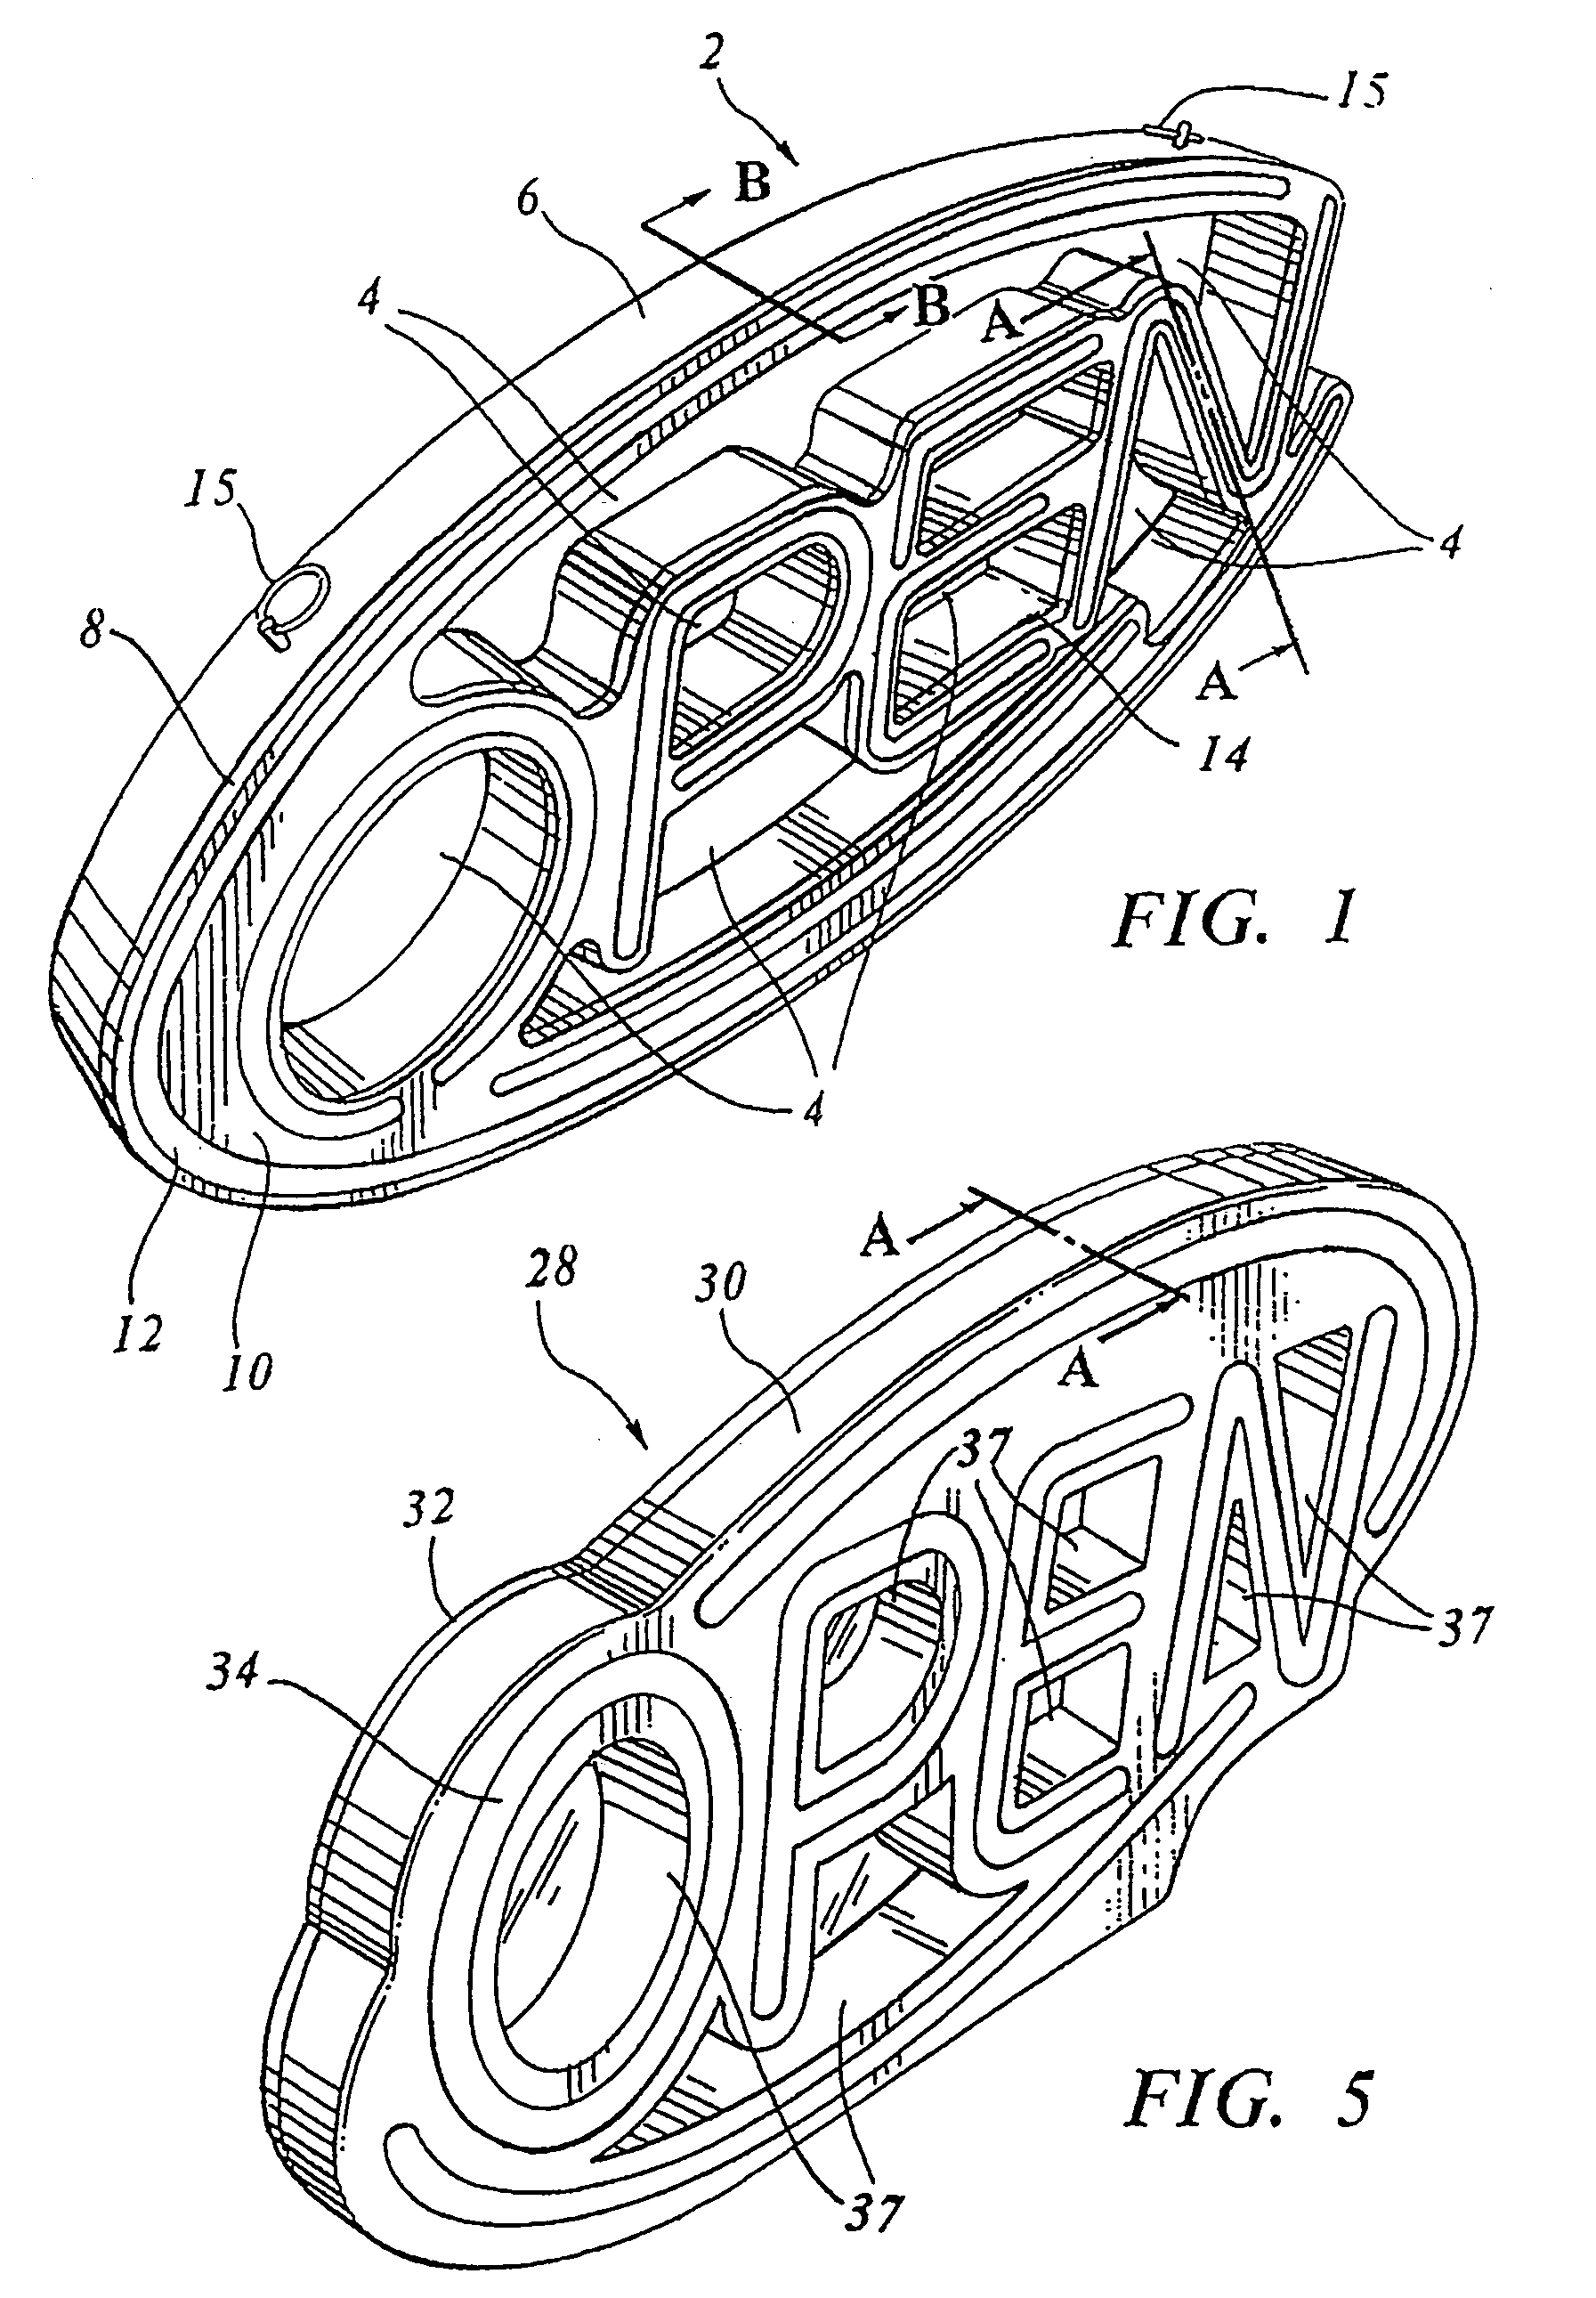 Method and apparatus for simulating the appearance of a neon sign